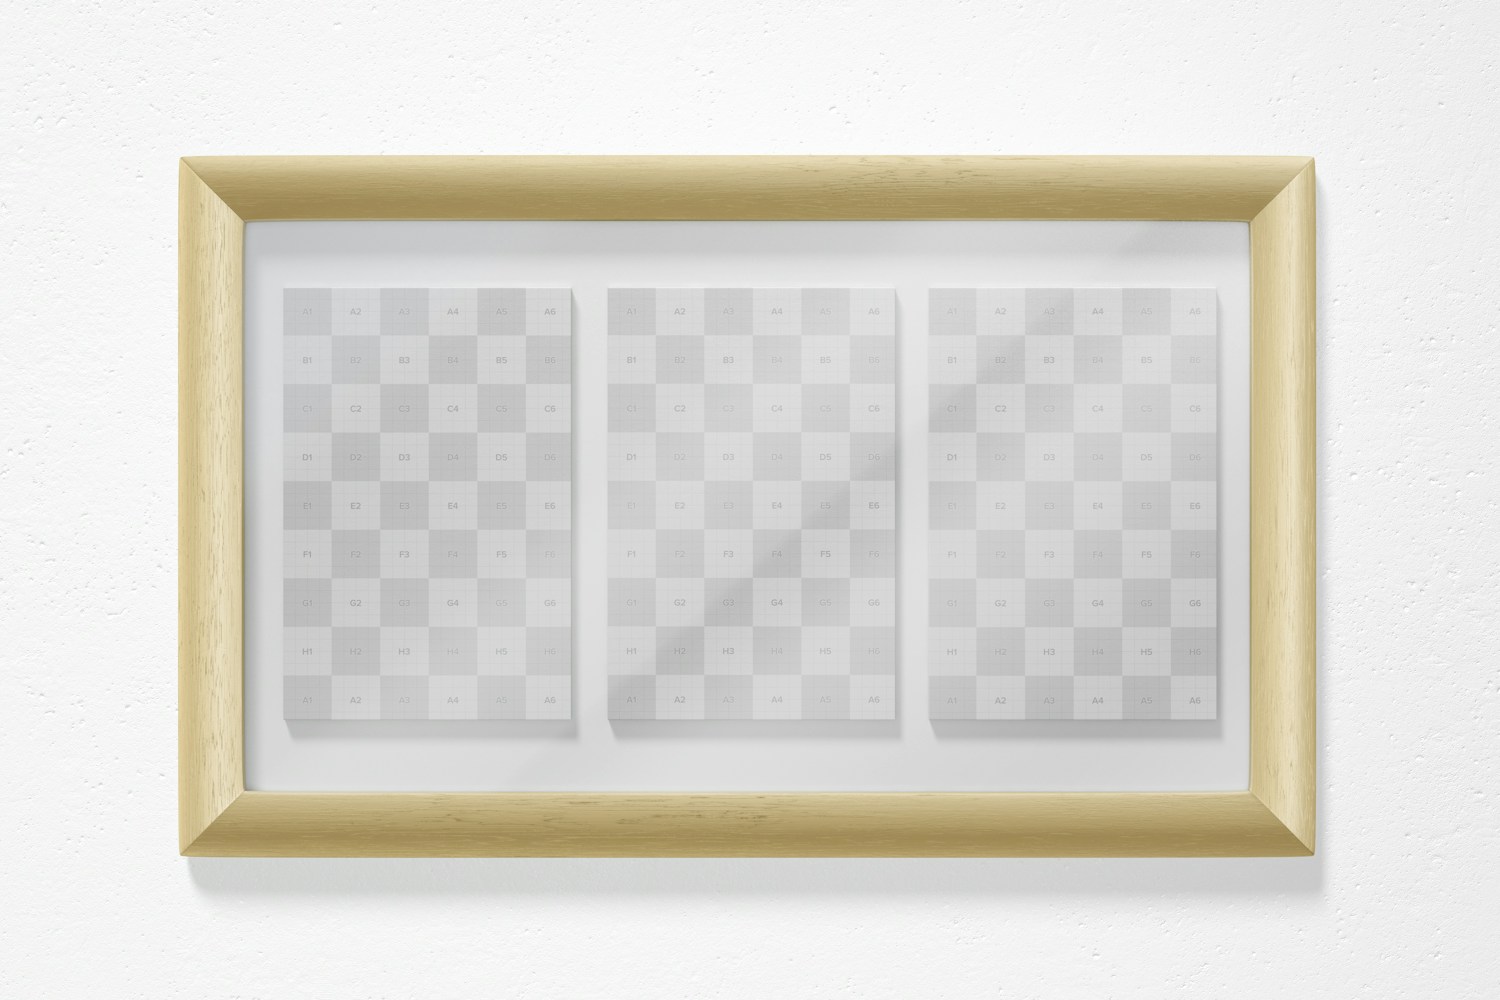 2:3 Collage Picture Frame Mockup, Front View